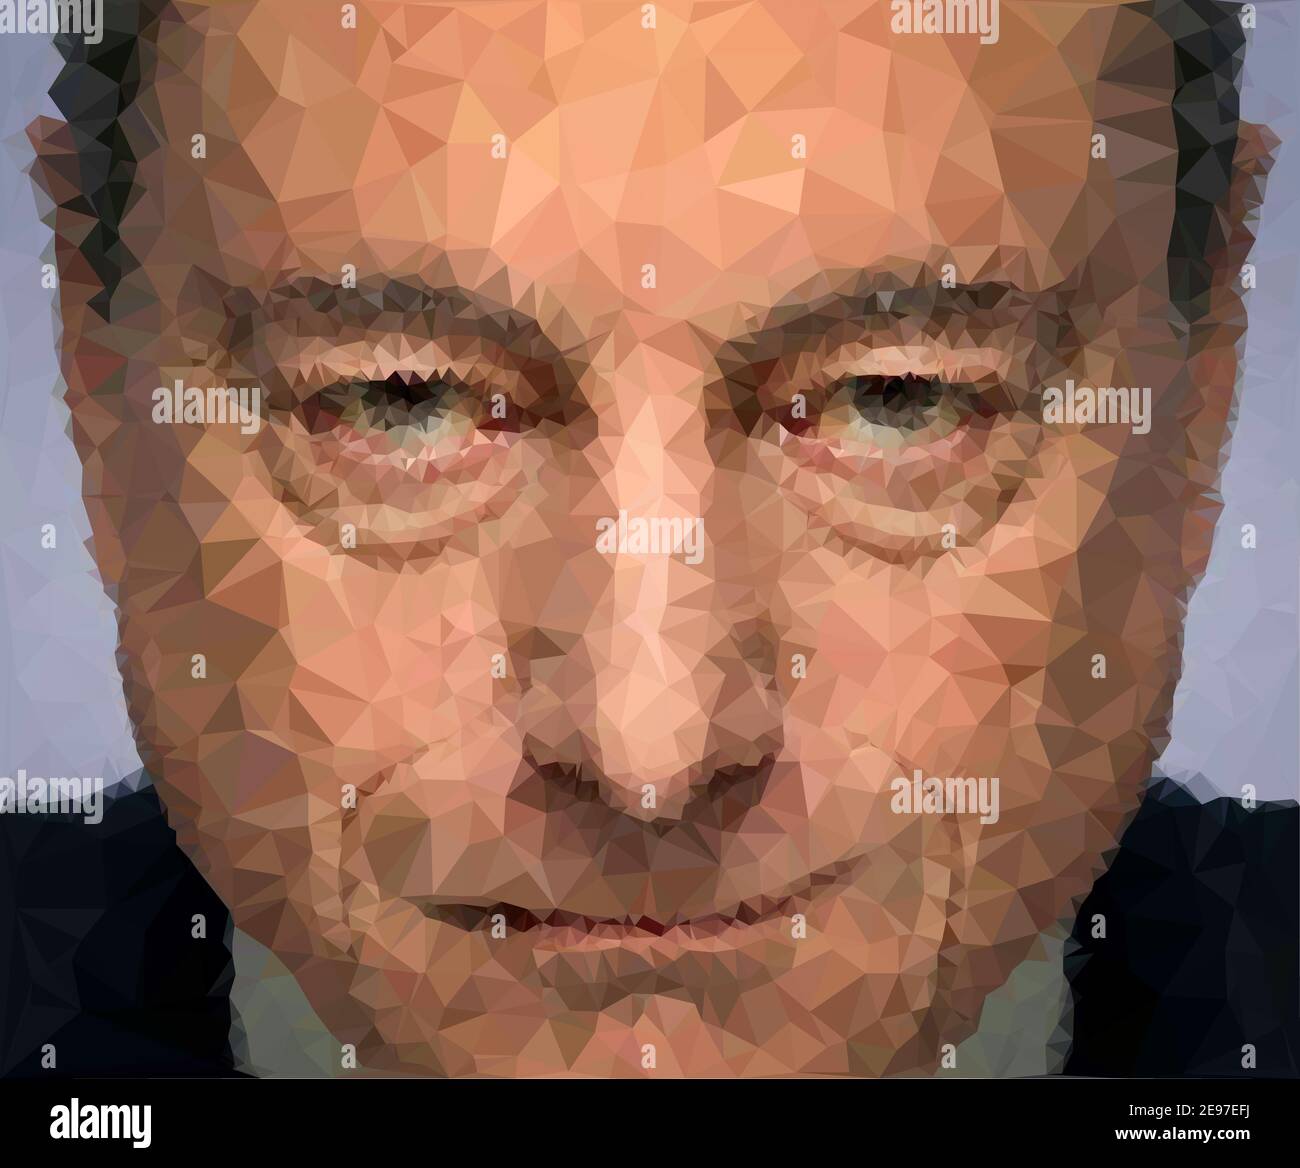 Rome, Italy, february 2021, Mario Draghi, polygonal portrait, graphic elaboration and illustration, vector file, editorial Stock Photo